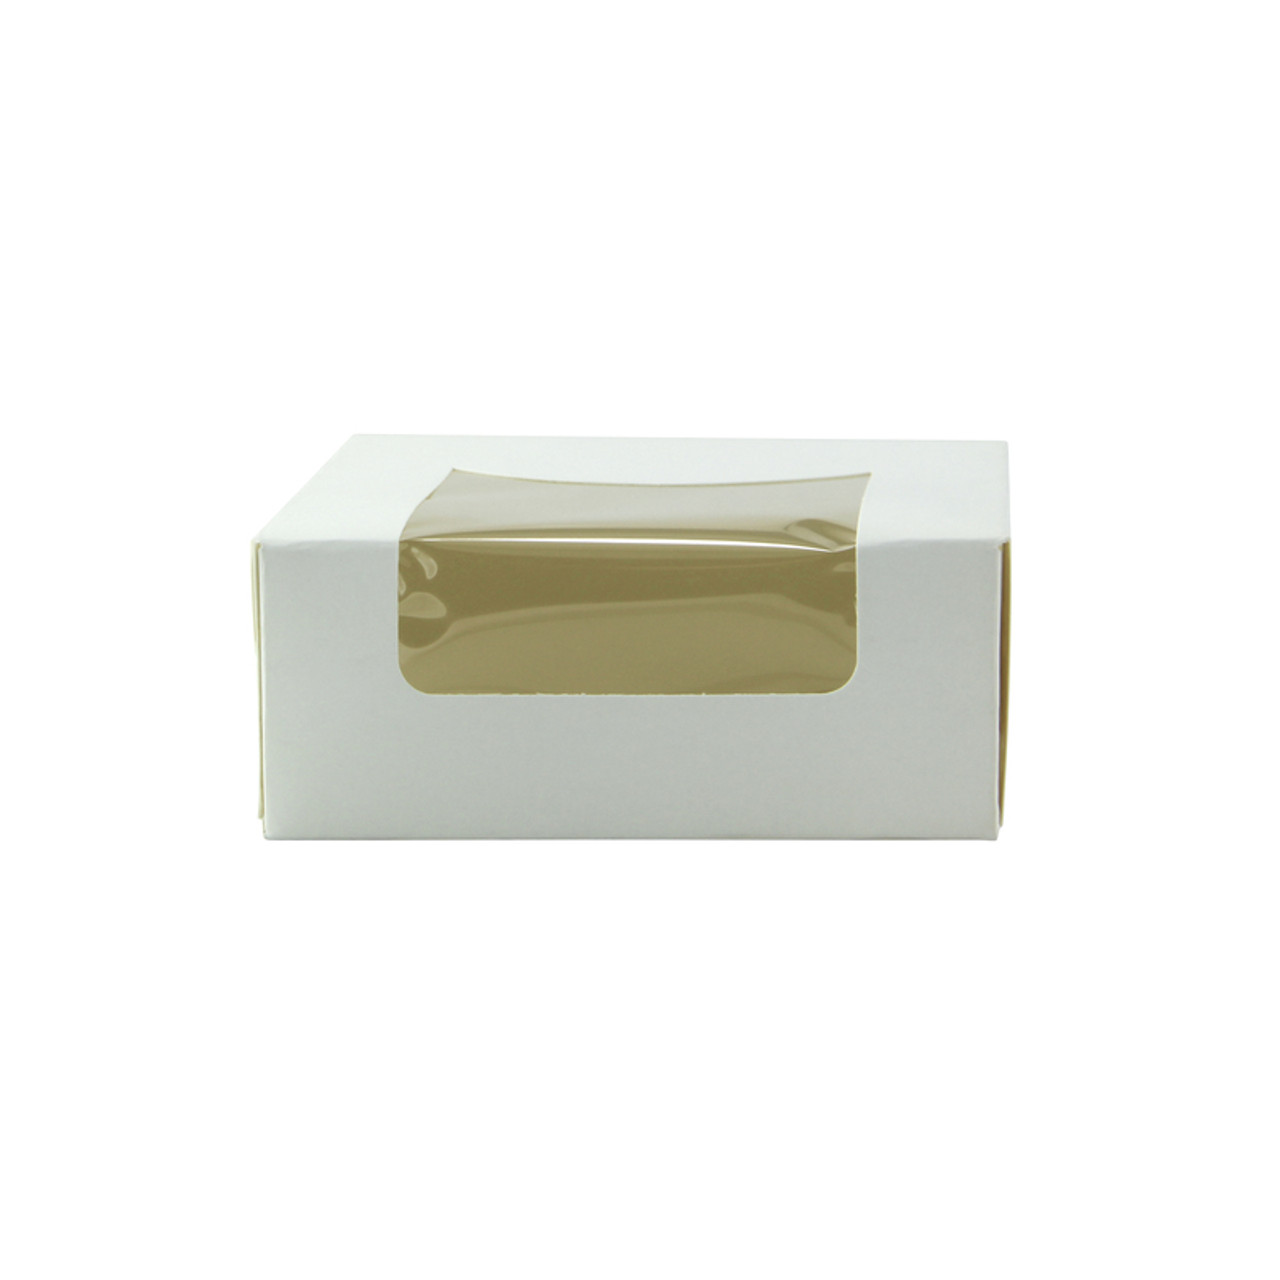 209PAT100J White Pastry Box with PET Window 3.9 x 3.9 x 1.6in - 420 pcs